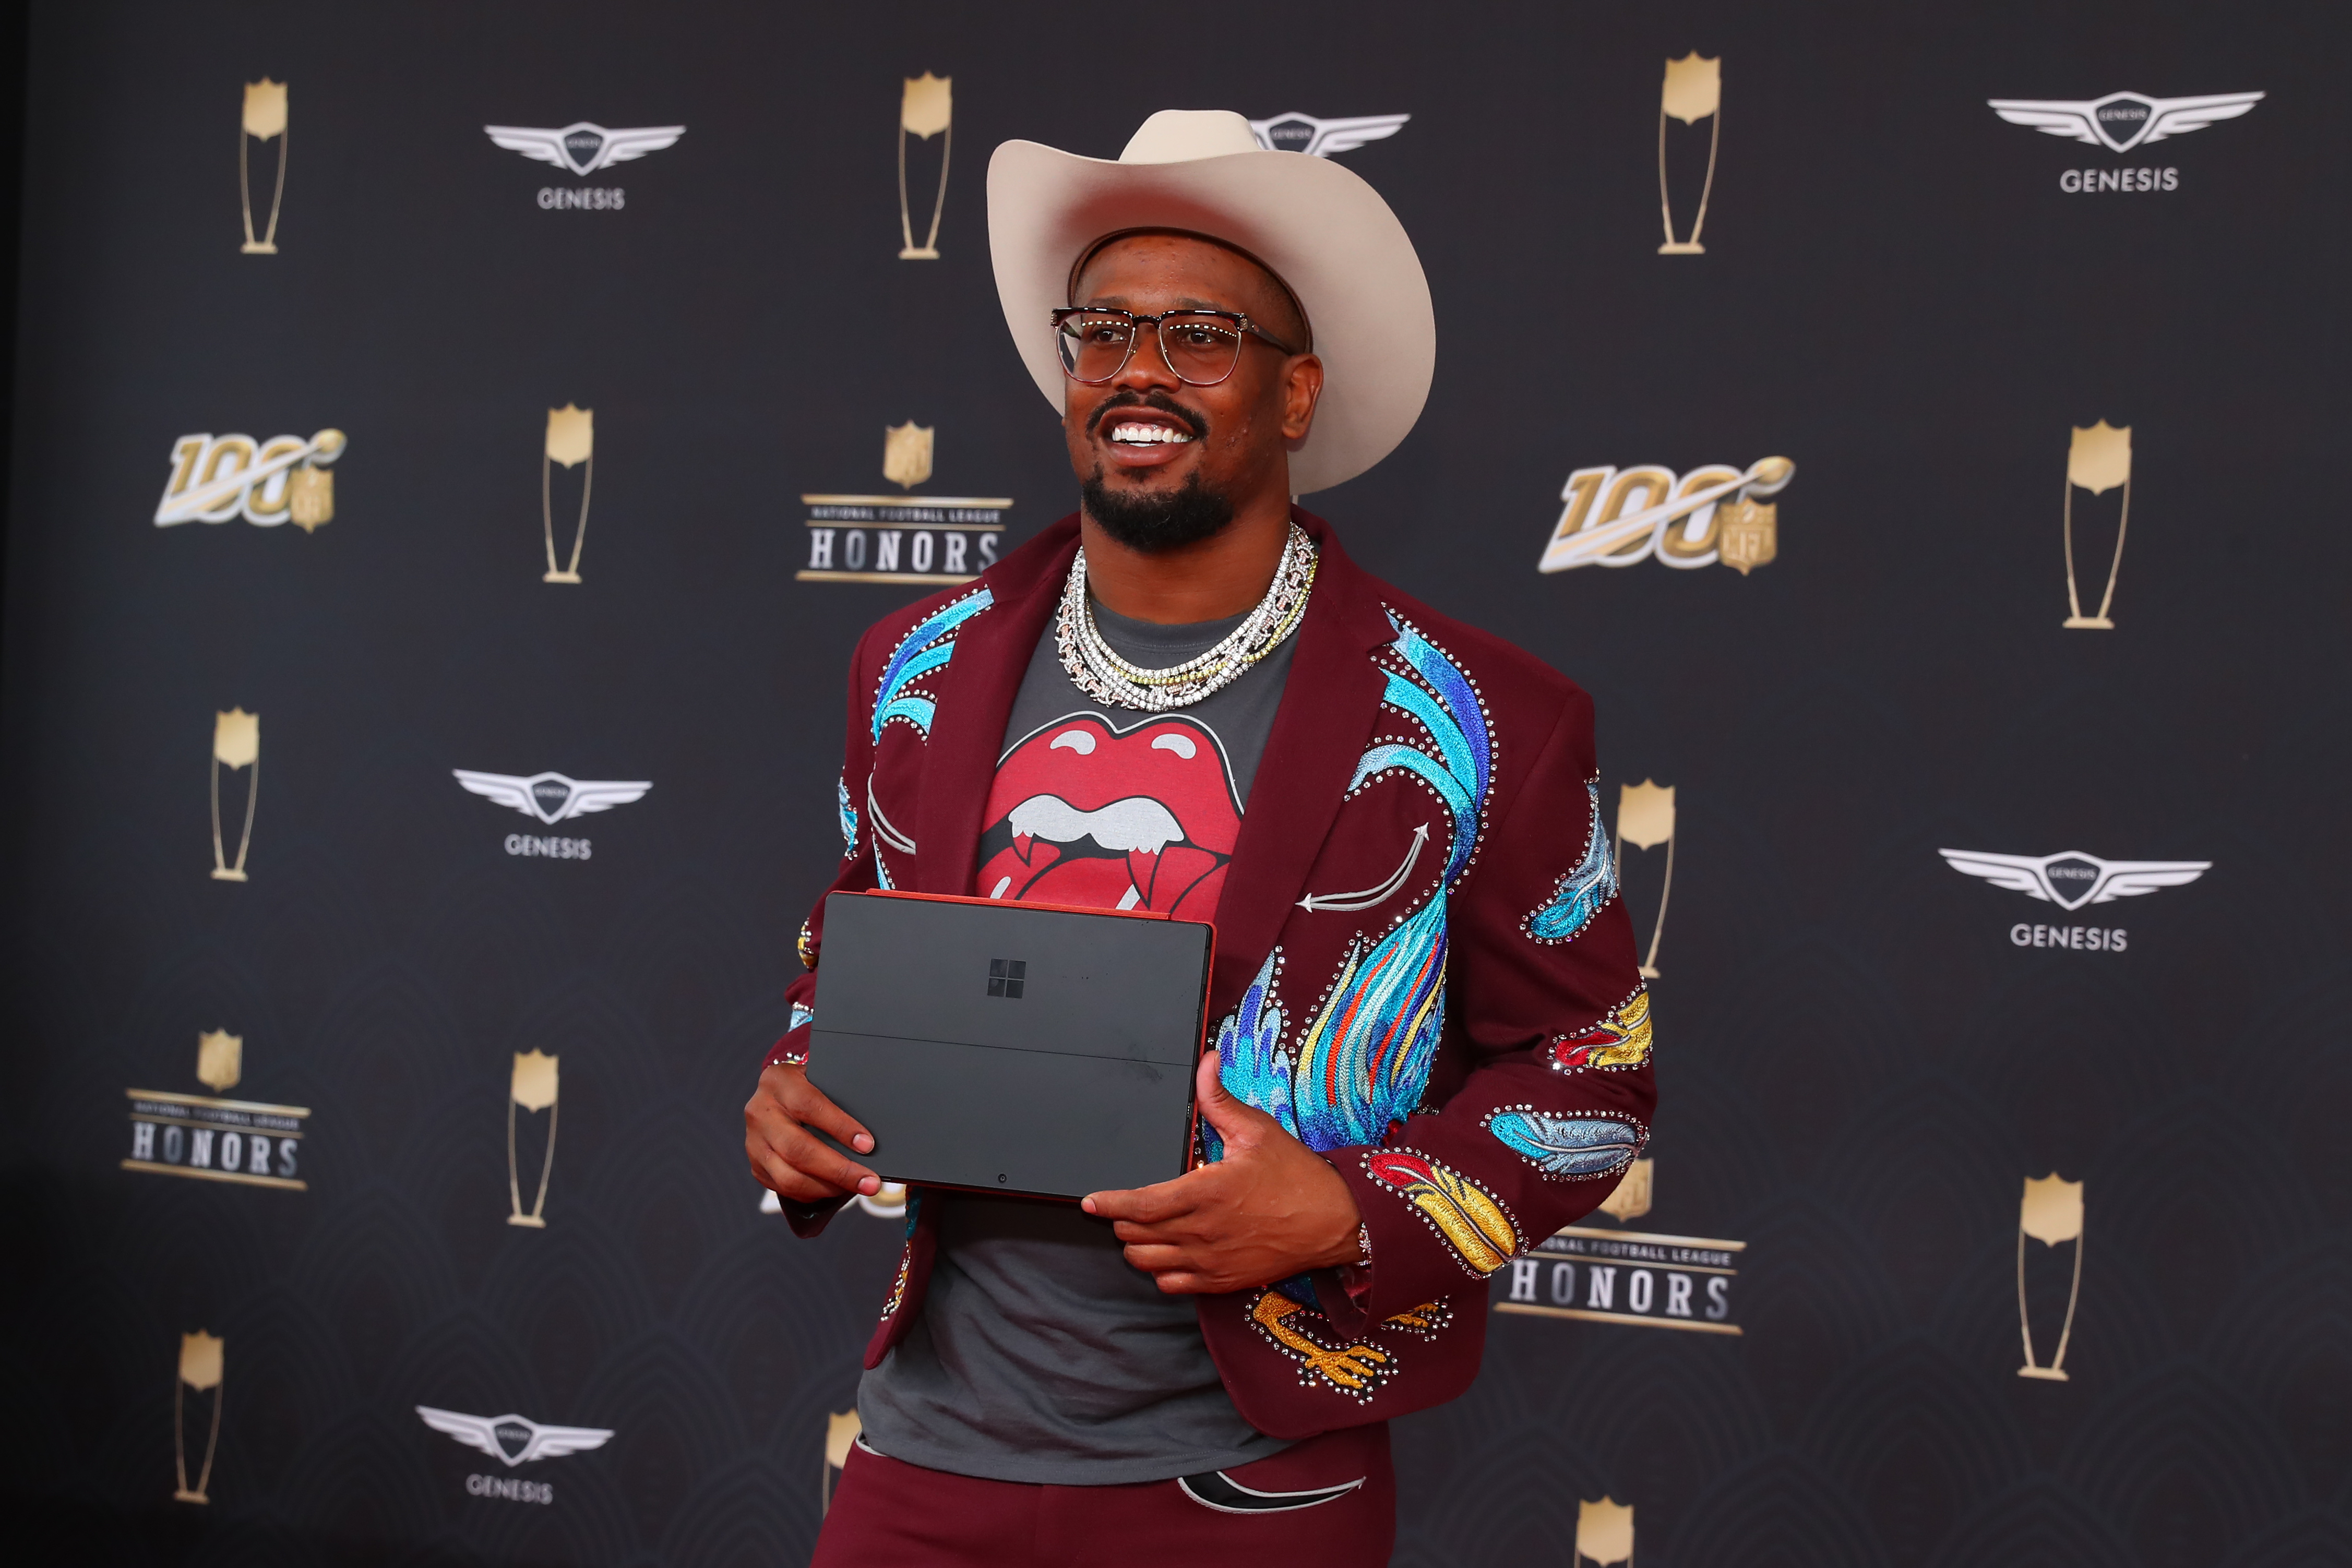 Broncos' Von Miller prior to the NFL Honors